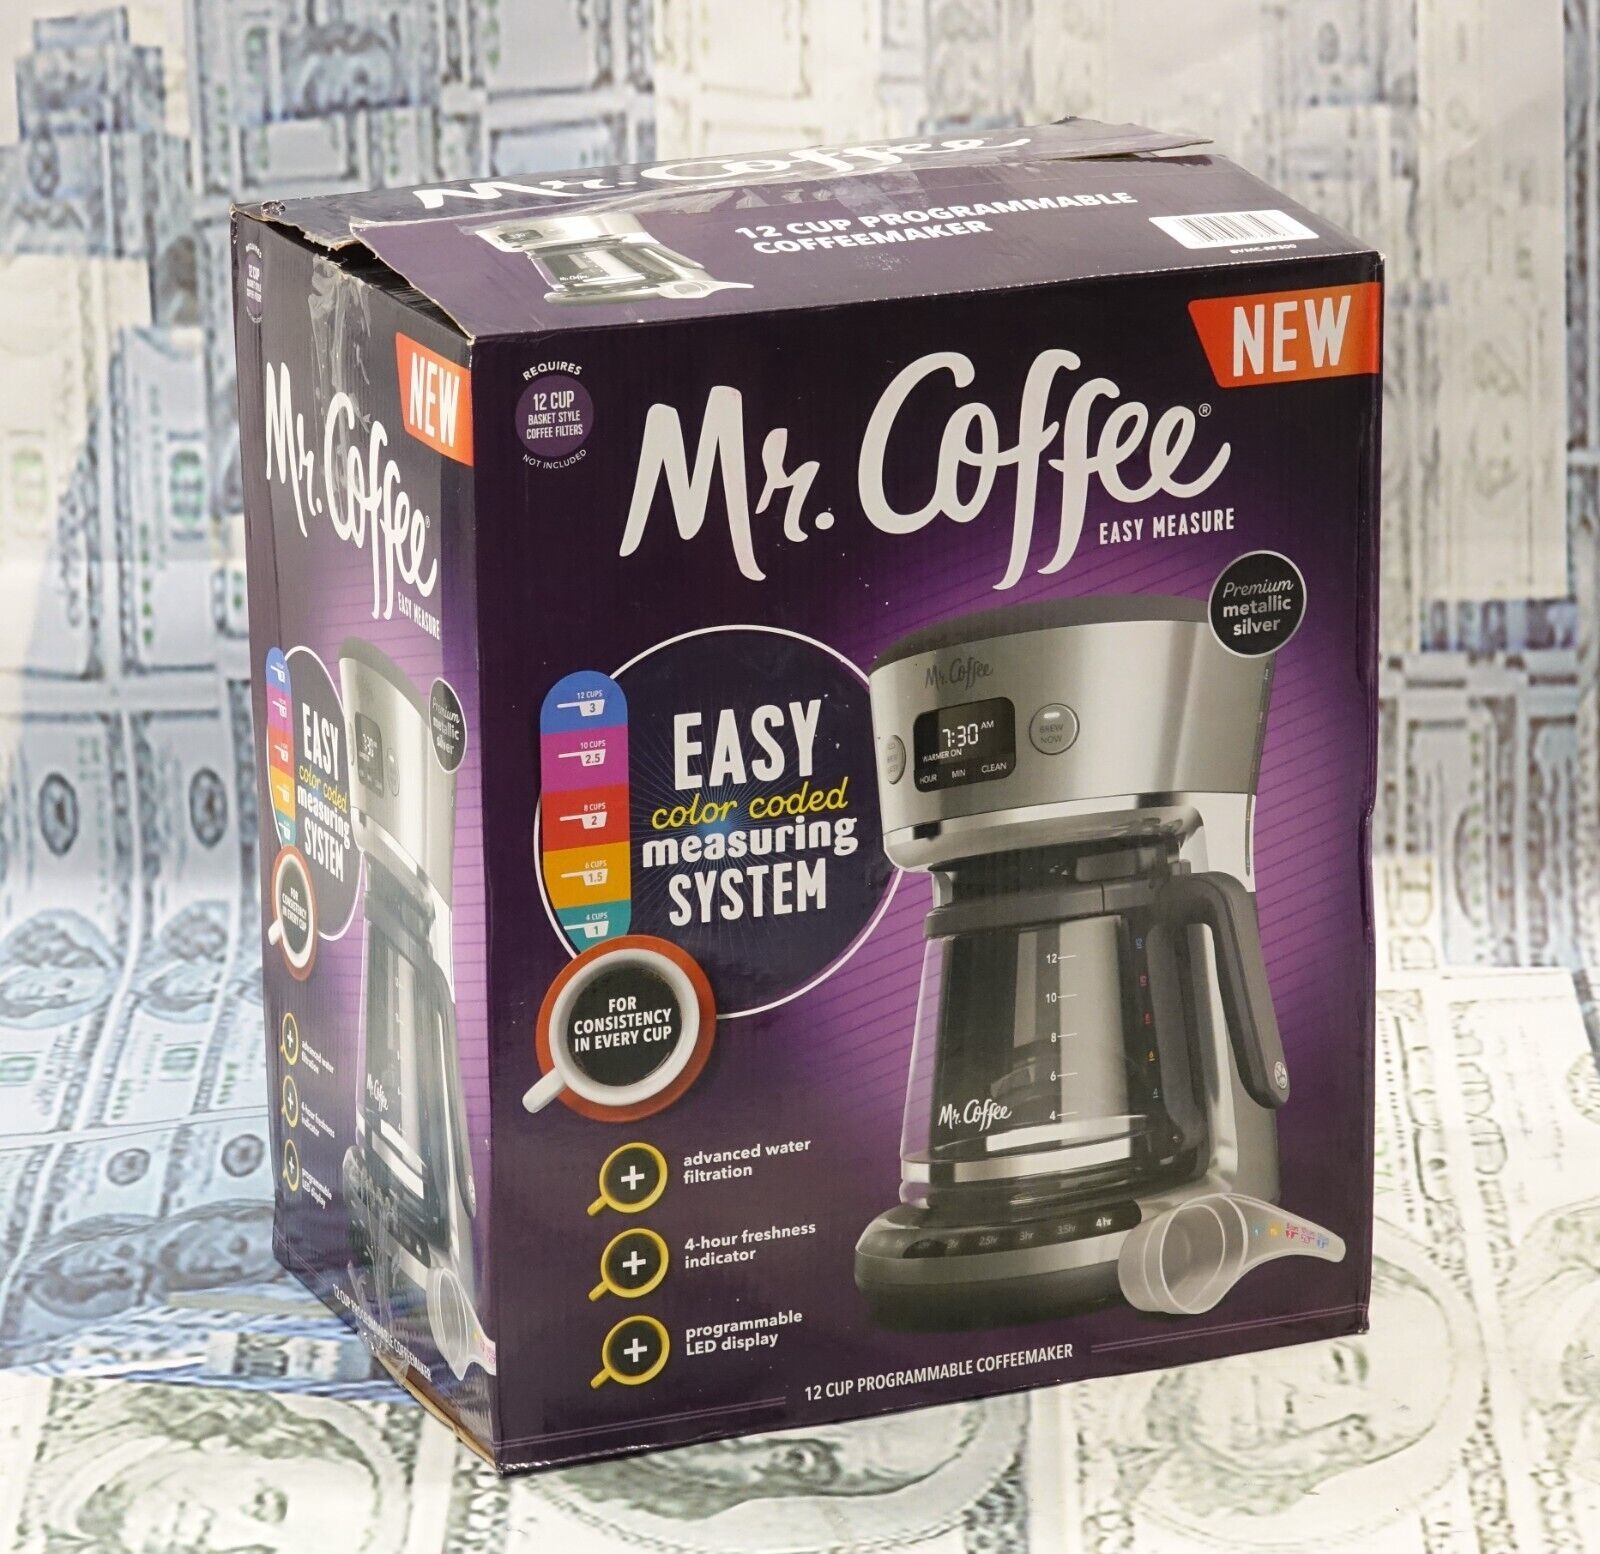 12-CUP Coffee Carafe Pot for Mr. Coffee, Oster Coffee Maker Part# PLD-12  series